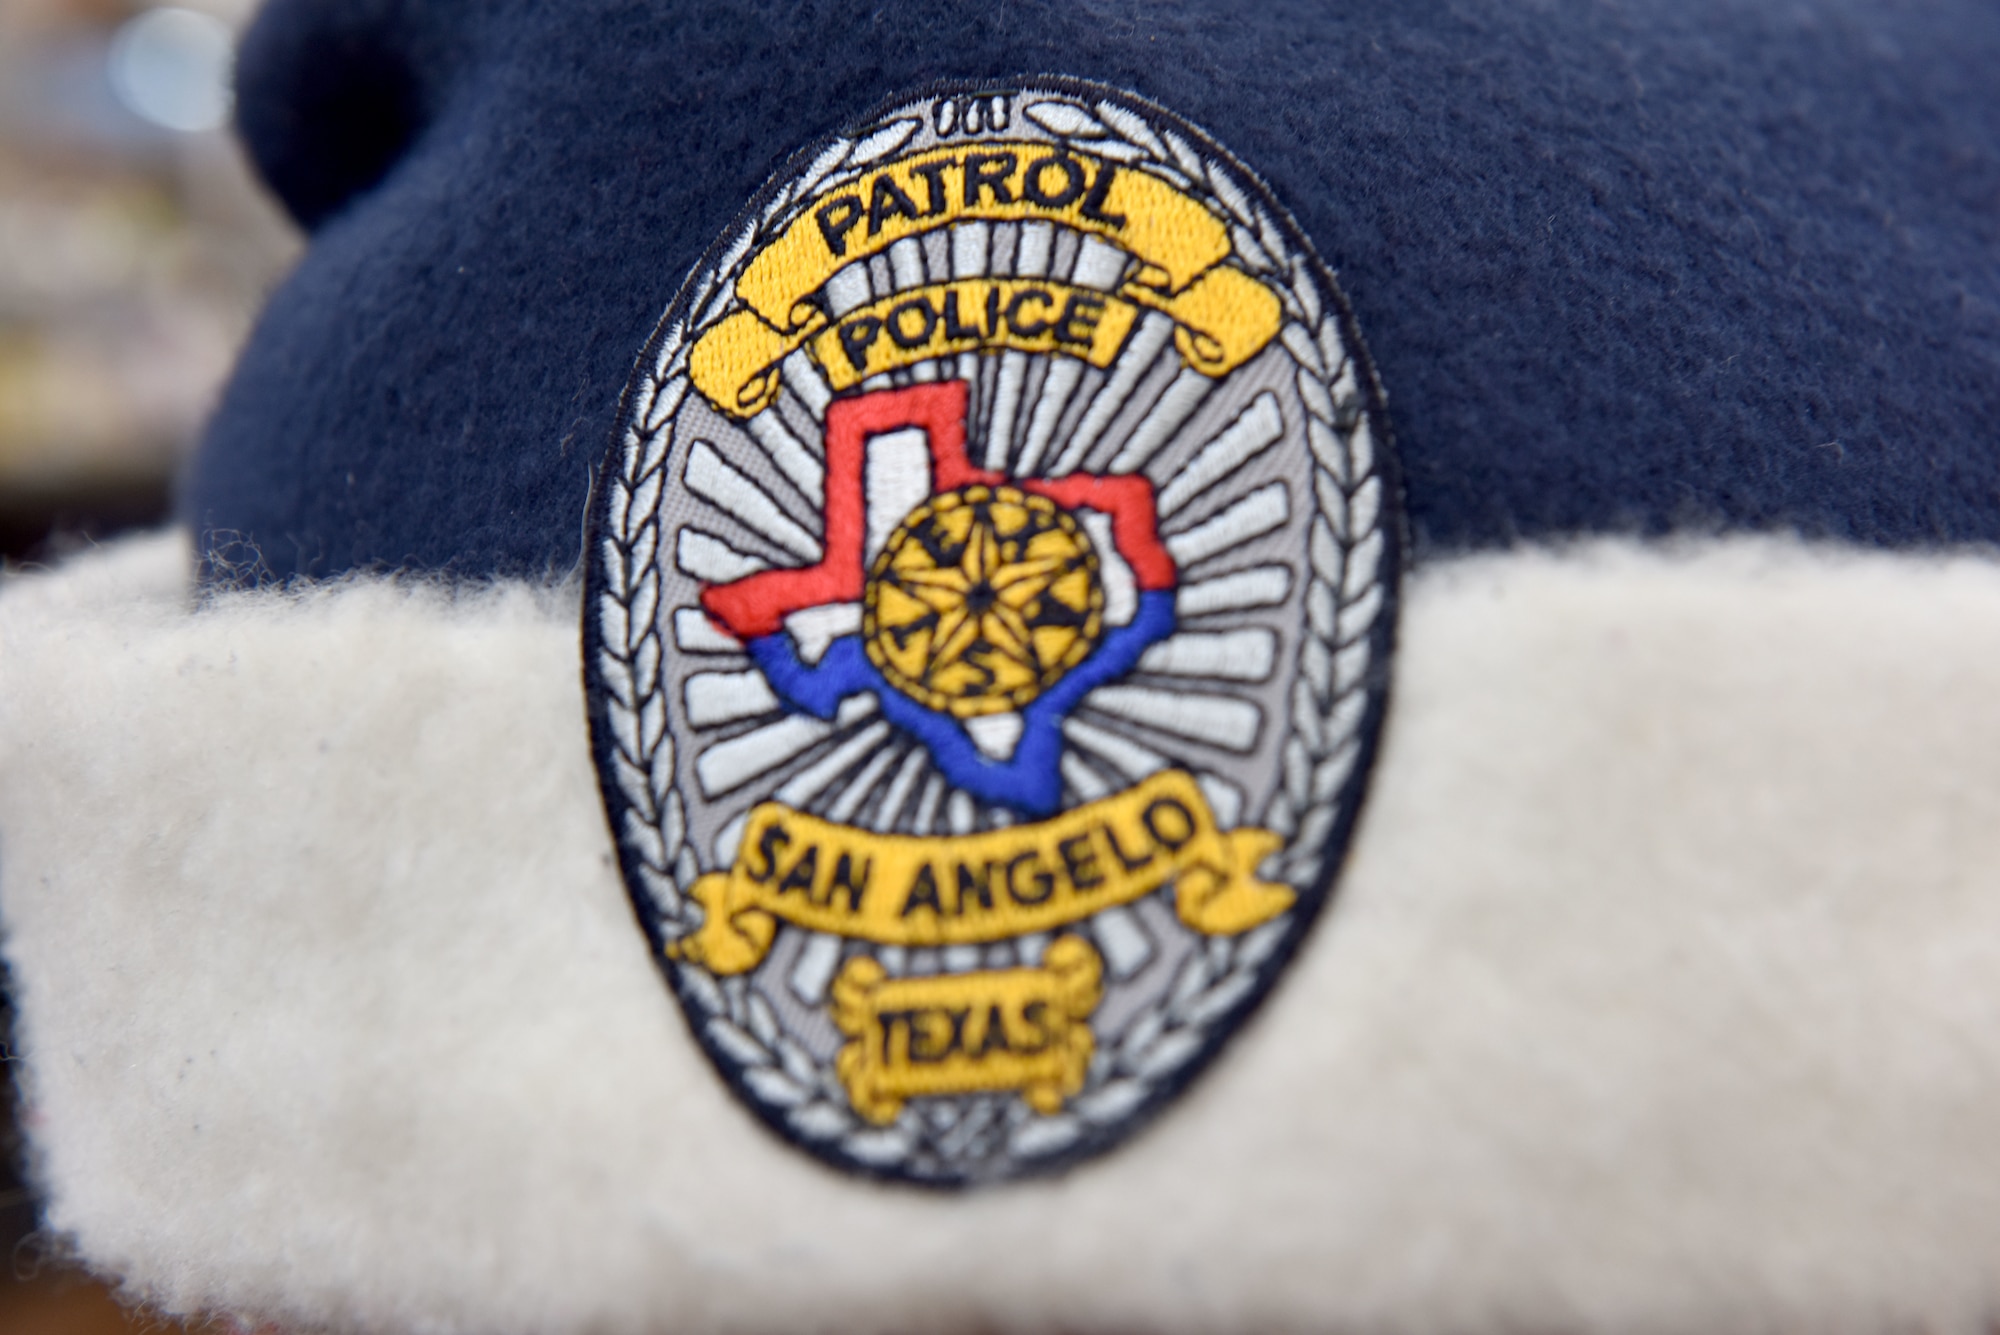 A police officer participating in the 13th Annual Operation Blue Santa shows off his blue Santa hat complete with a San Angelo police badge in San Angelo, Texas, Dec. 12, 2020. This year, many children safely participated in the event with COVID-19 restrictions. (U.S. Air Force photo by Staff Sgt. Seraiah Wolf)